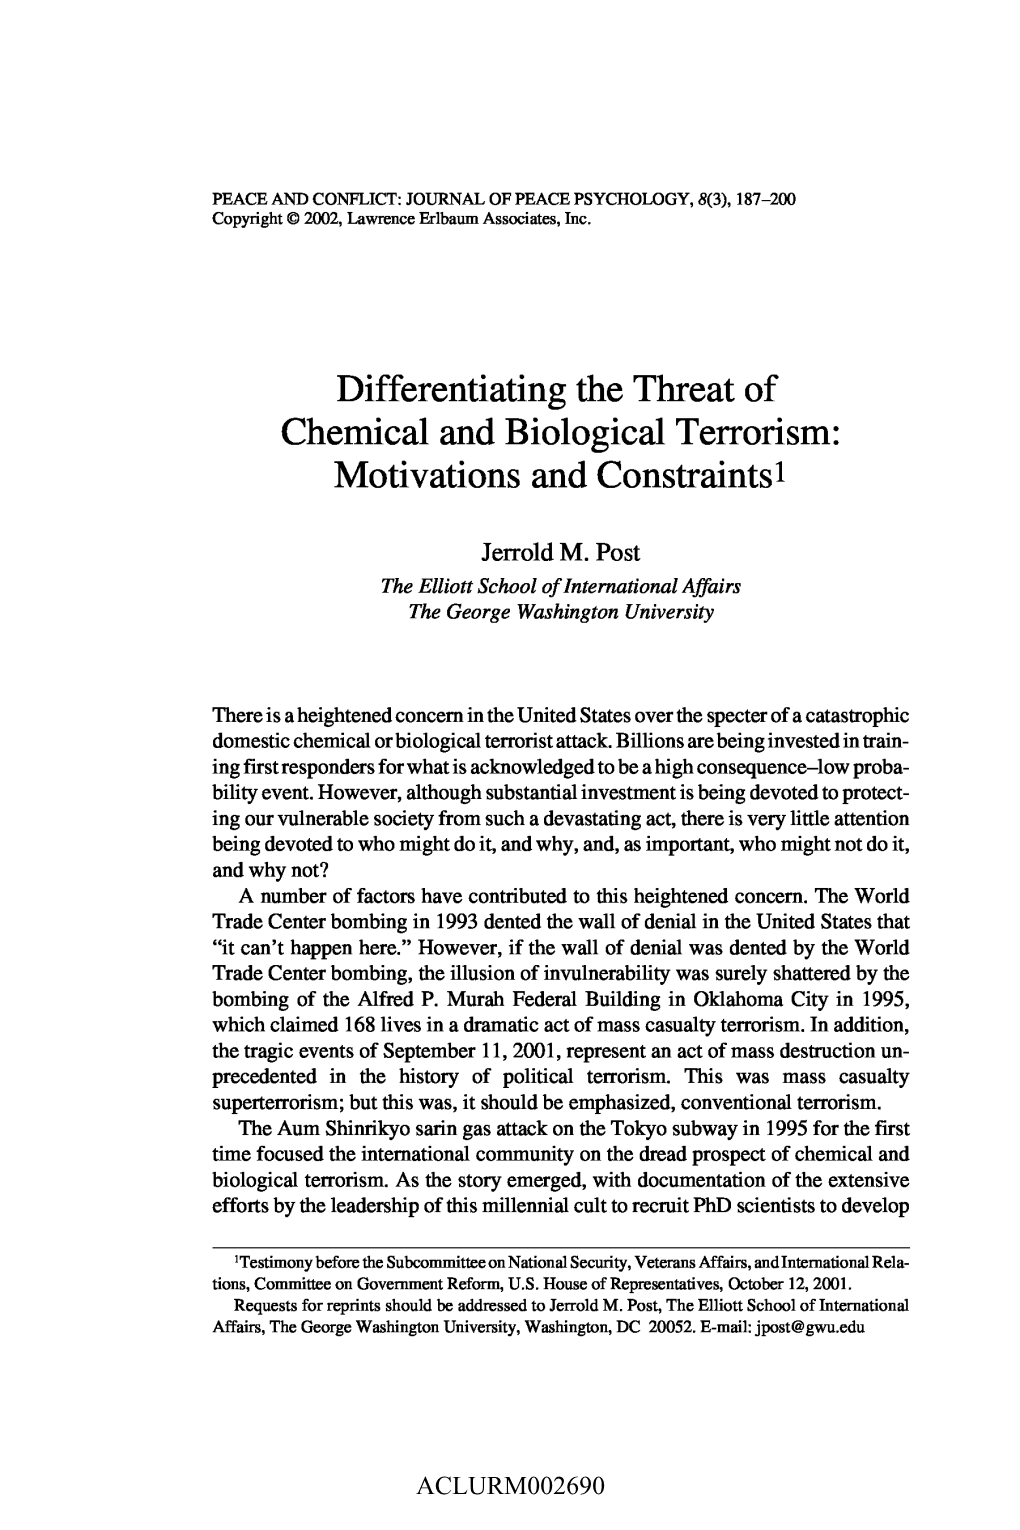 Differentiating the Threat of Chemical and Biological Terrorism: Motivations and Constraintsconstraints!1